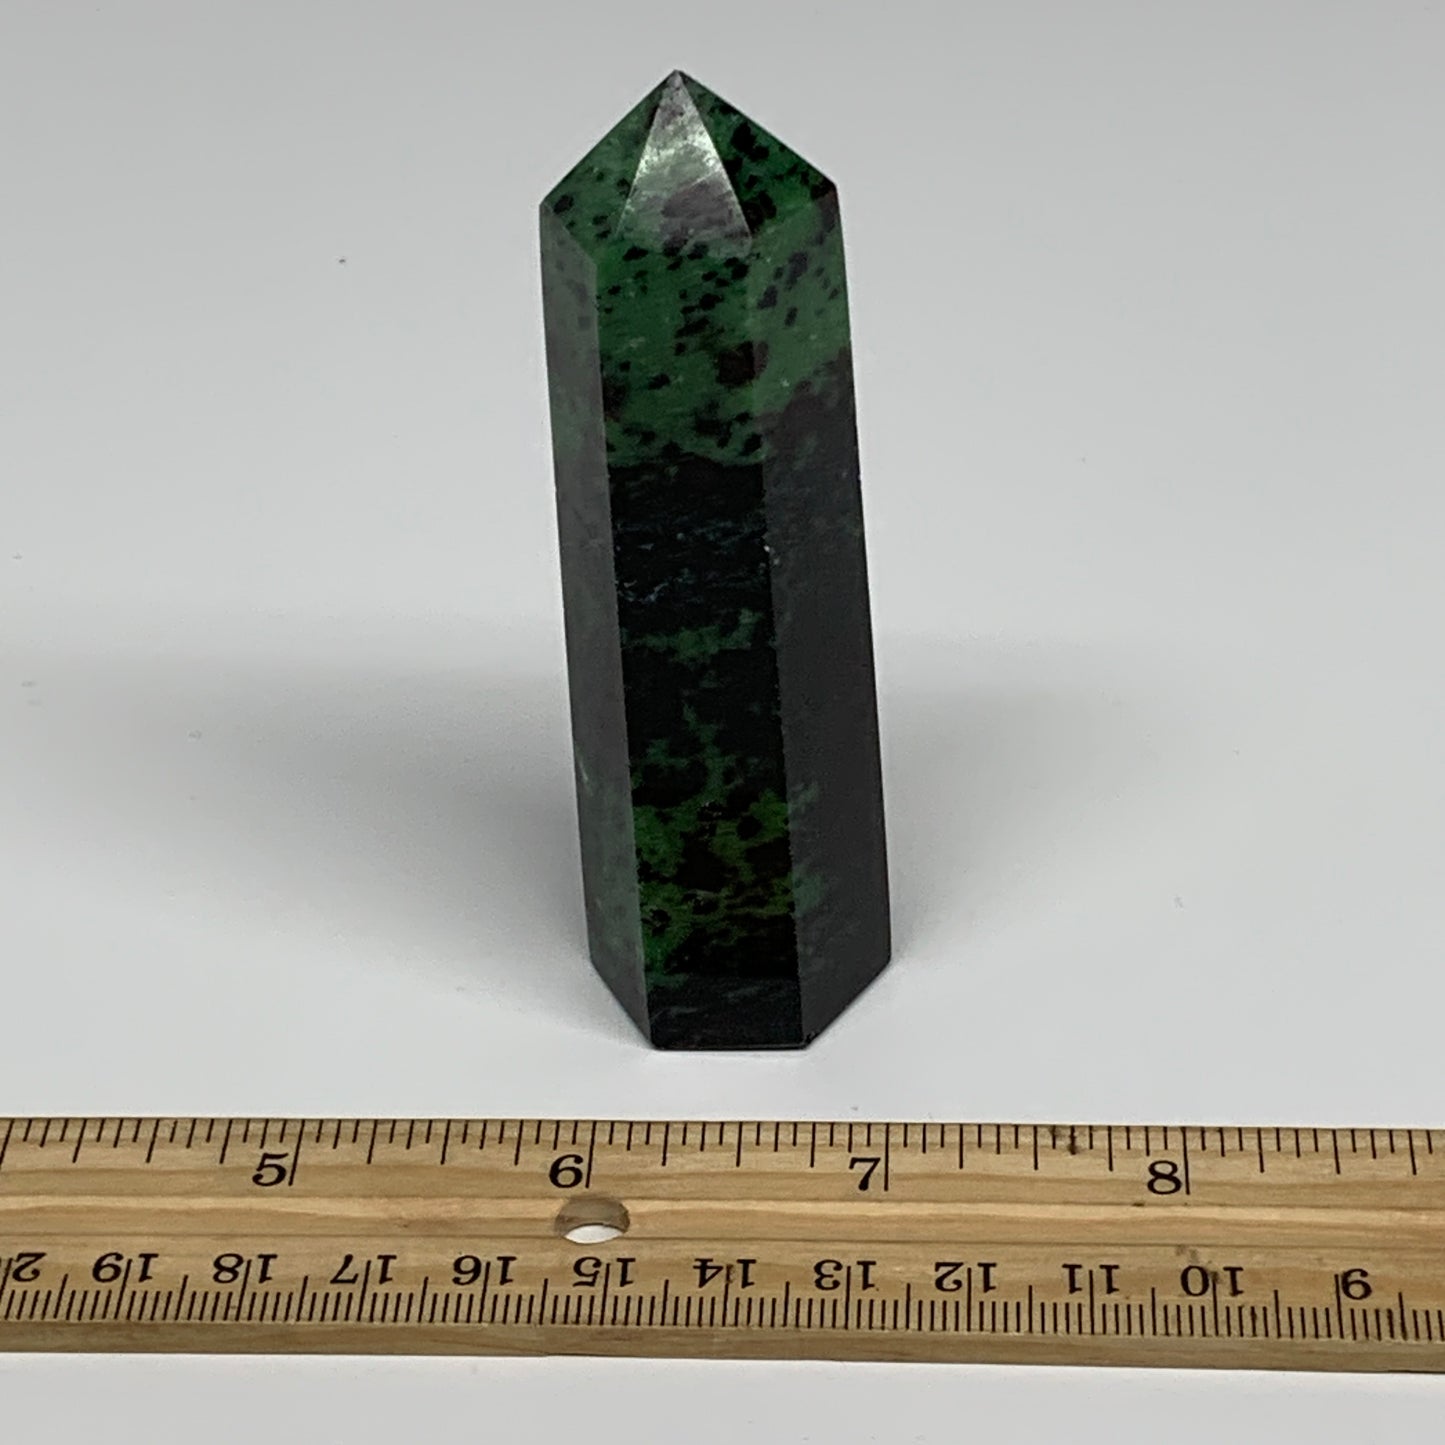 119.1g, 3.5"x0.9", Natural Ruby Zoisite Tower Point Obelisk @India, B31417